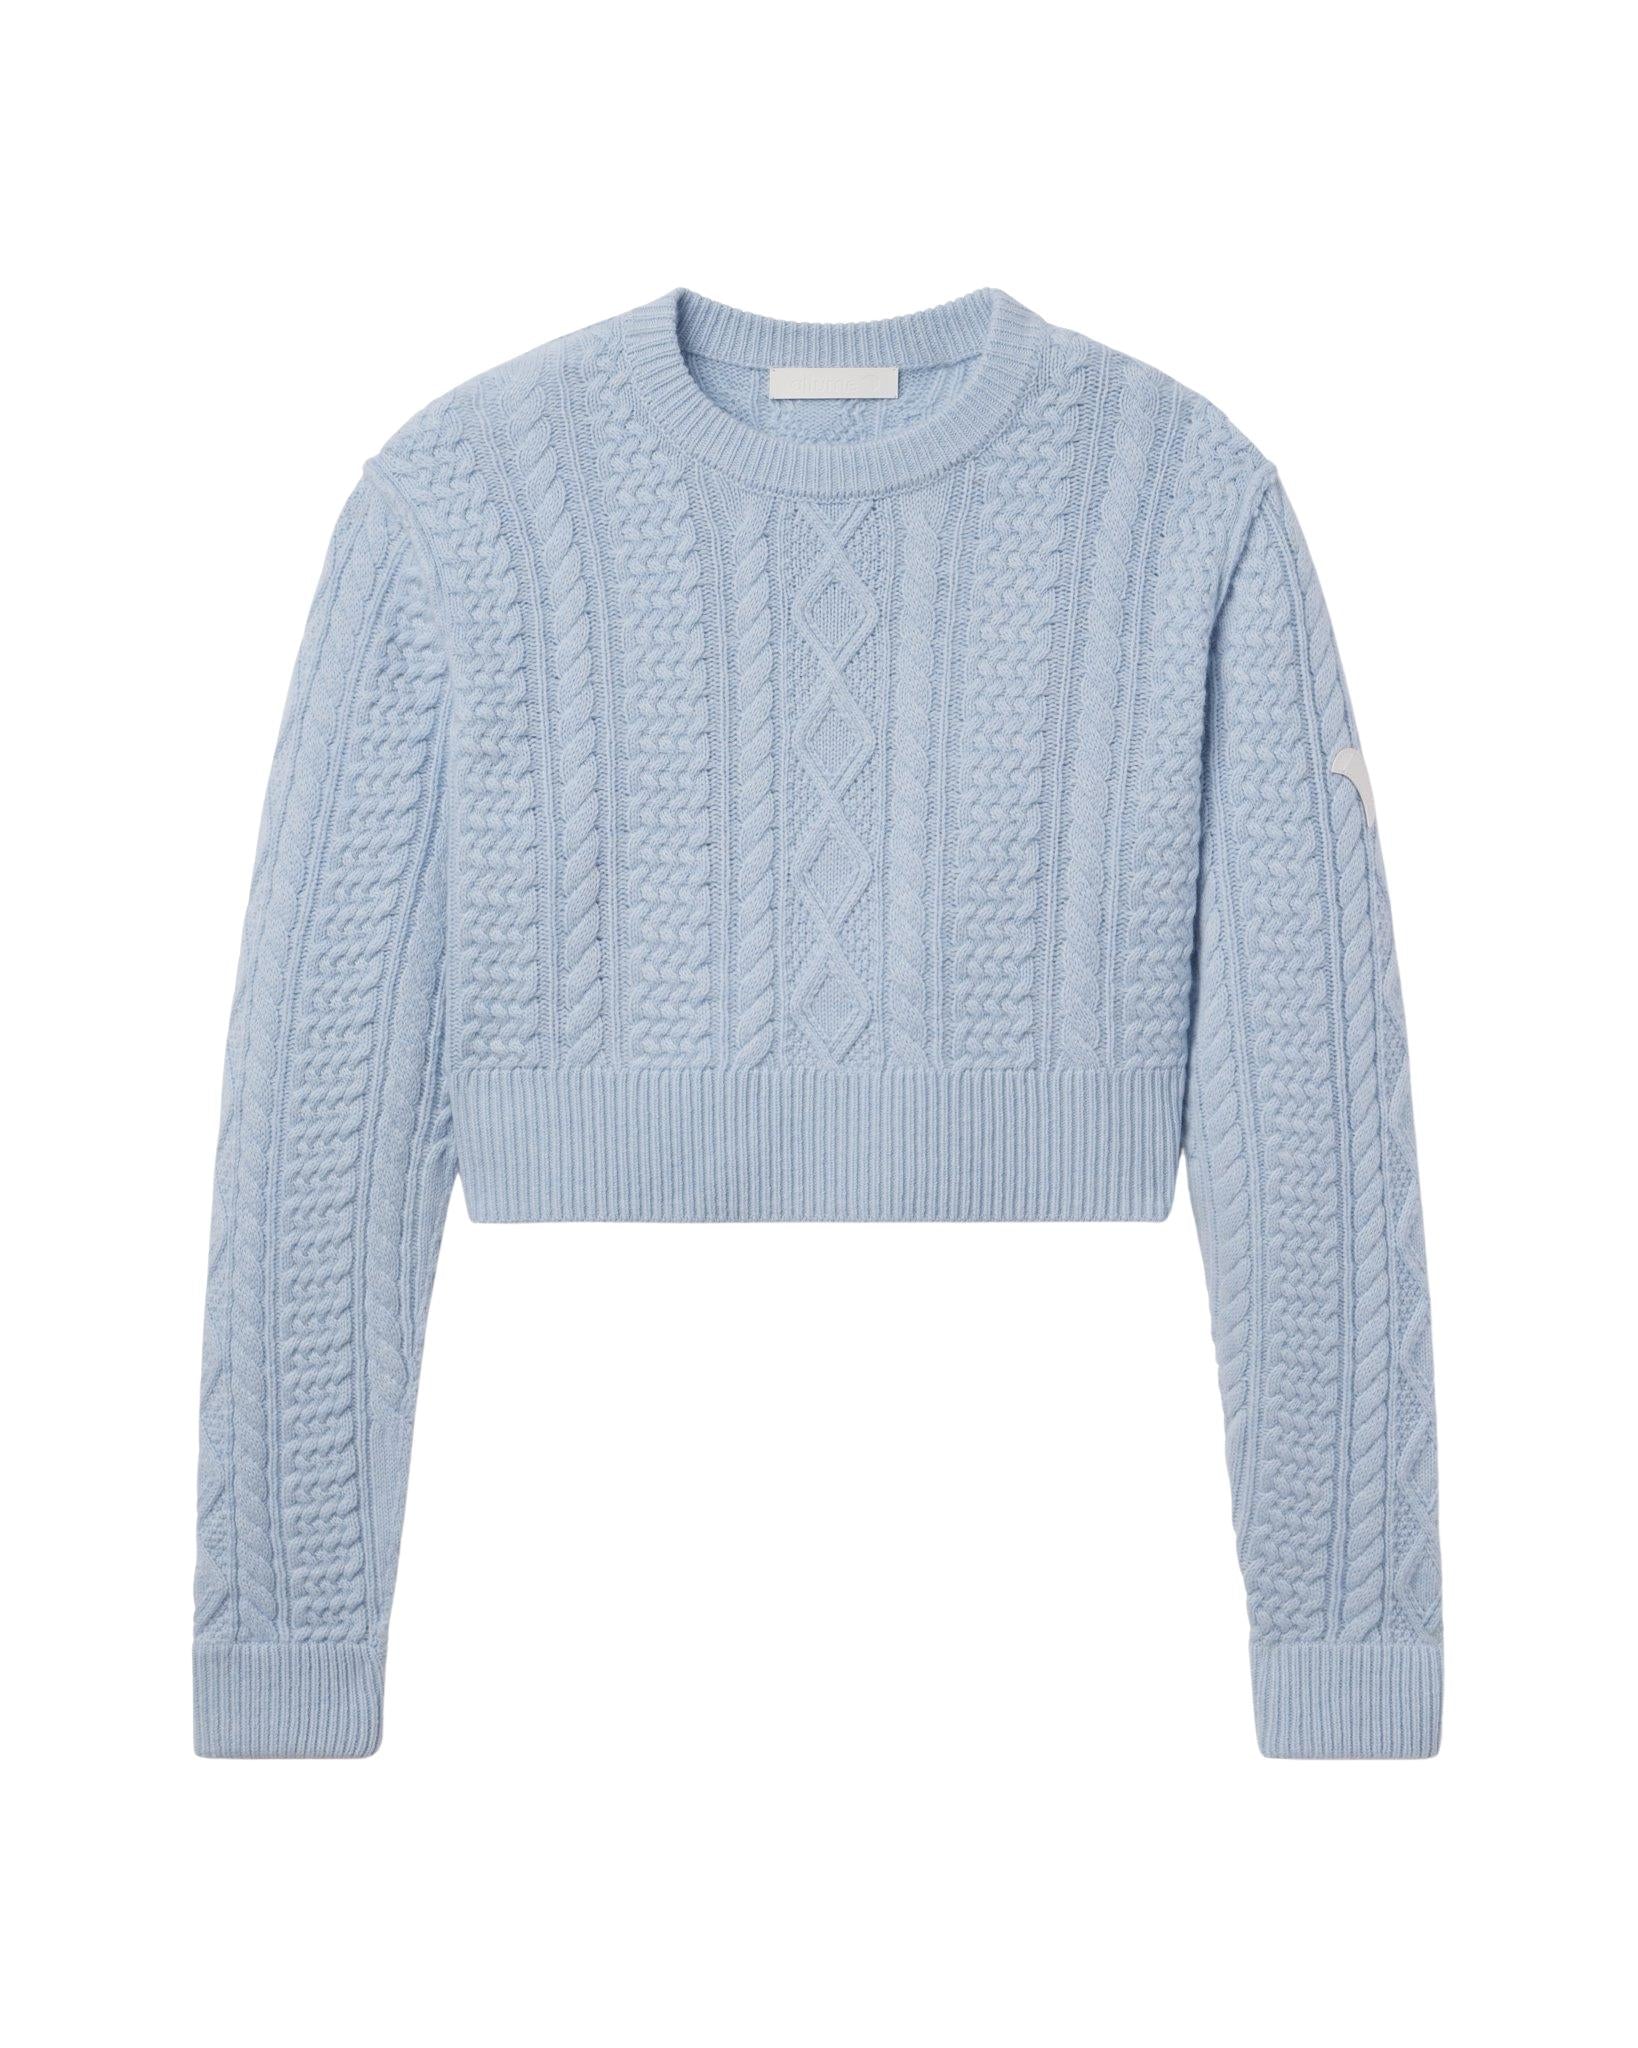 allume VF Merino Cashmere Blue RS—03C Cropped Cable Knit Powder Blue Knitwear